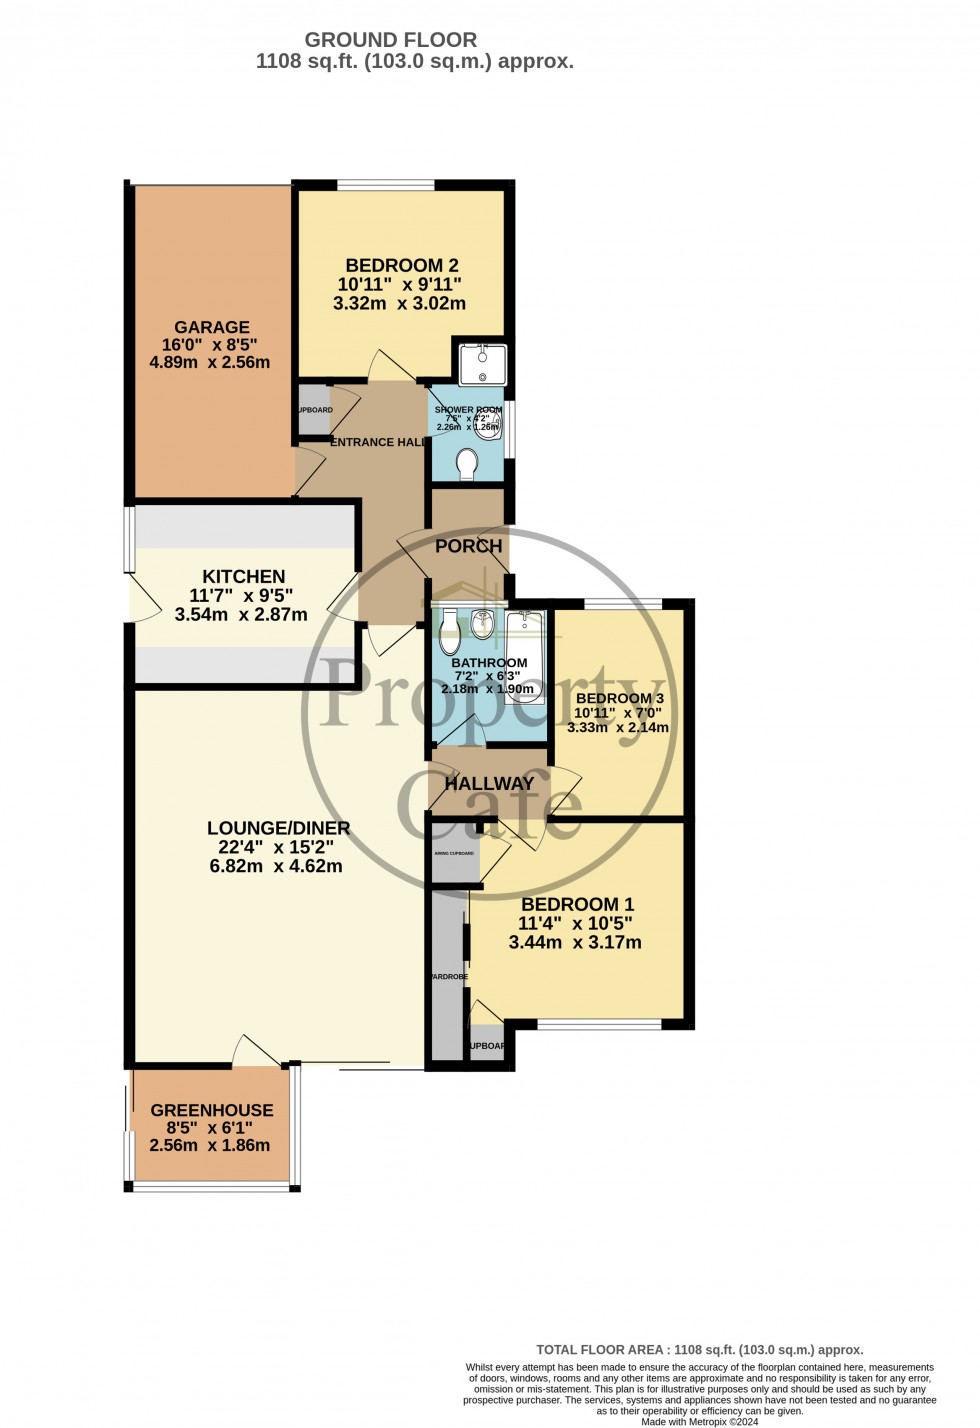 Floorplan for The Ridings, Bexhill-on-Sea, East Sussex